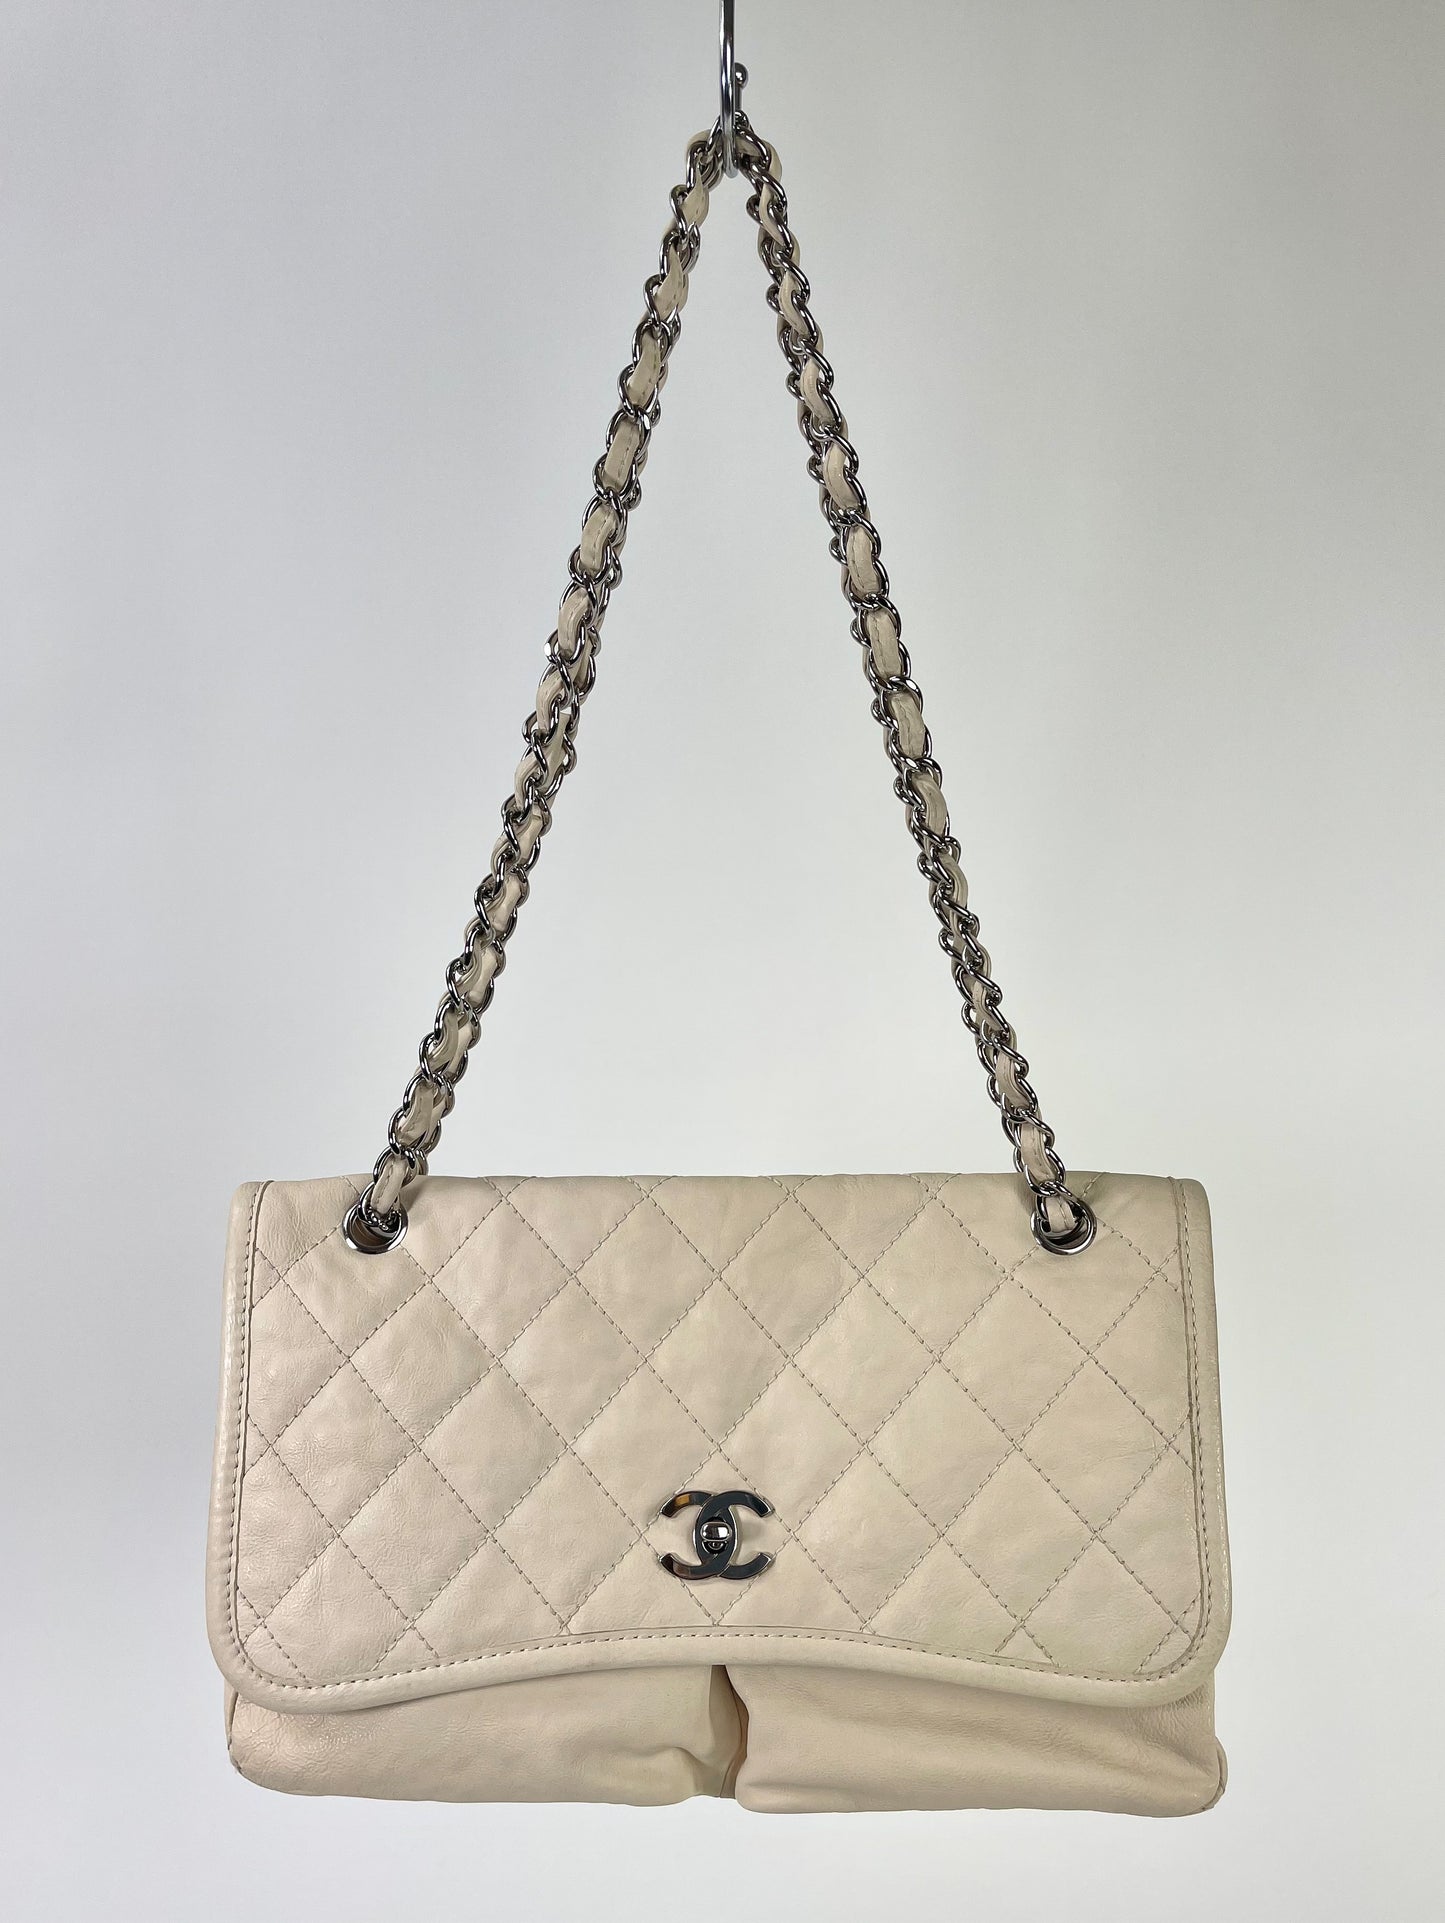 Chanel Medium Quilted Flap Bag